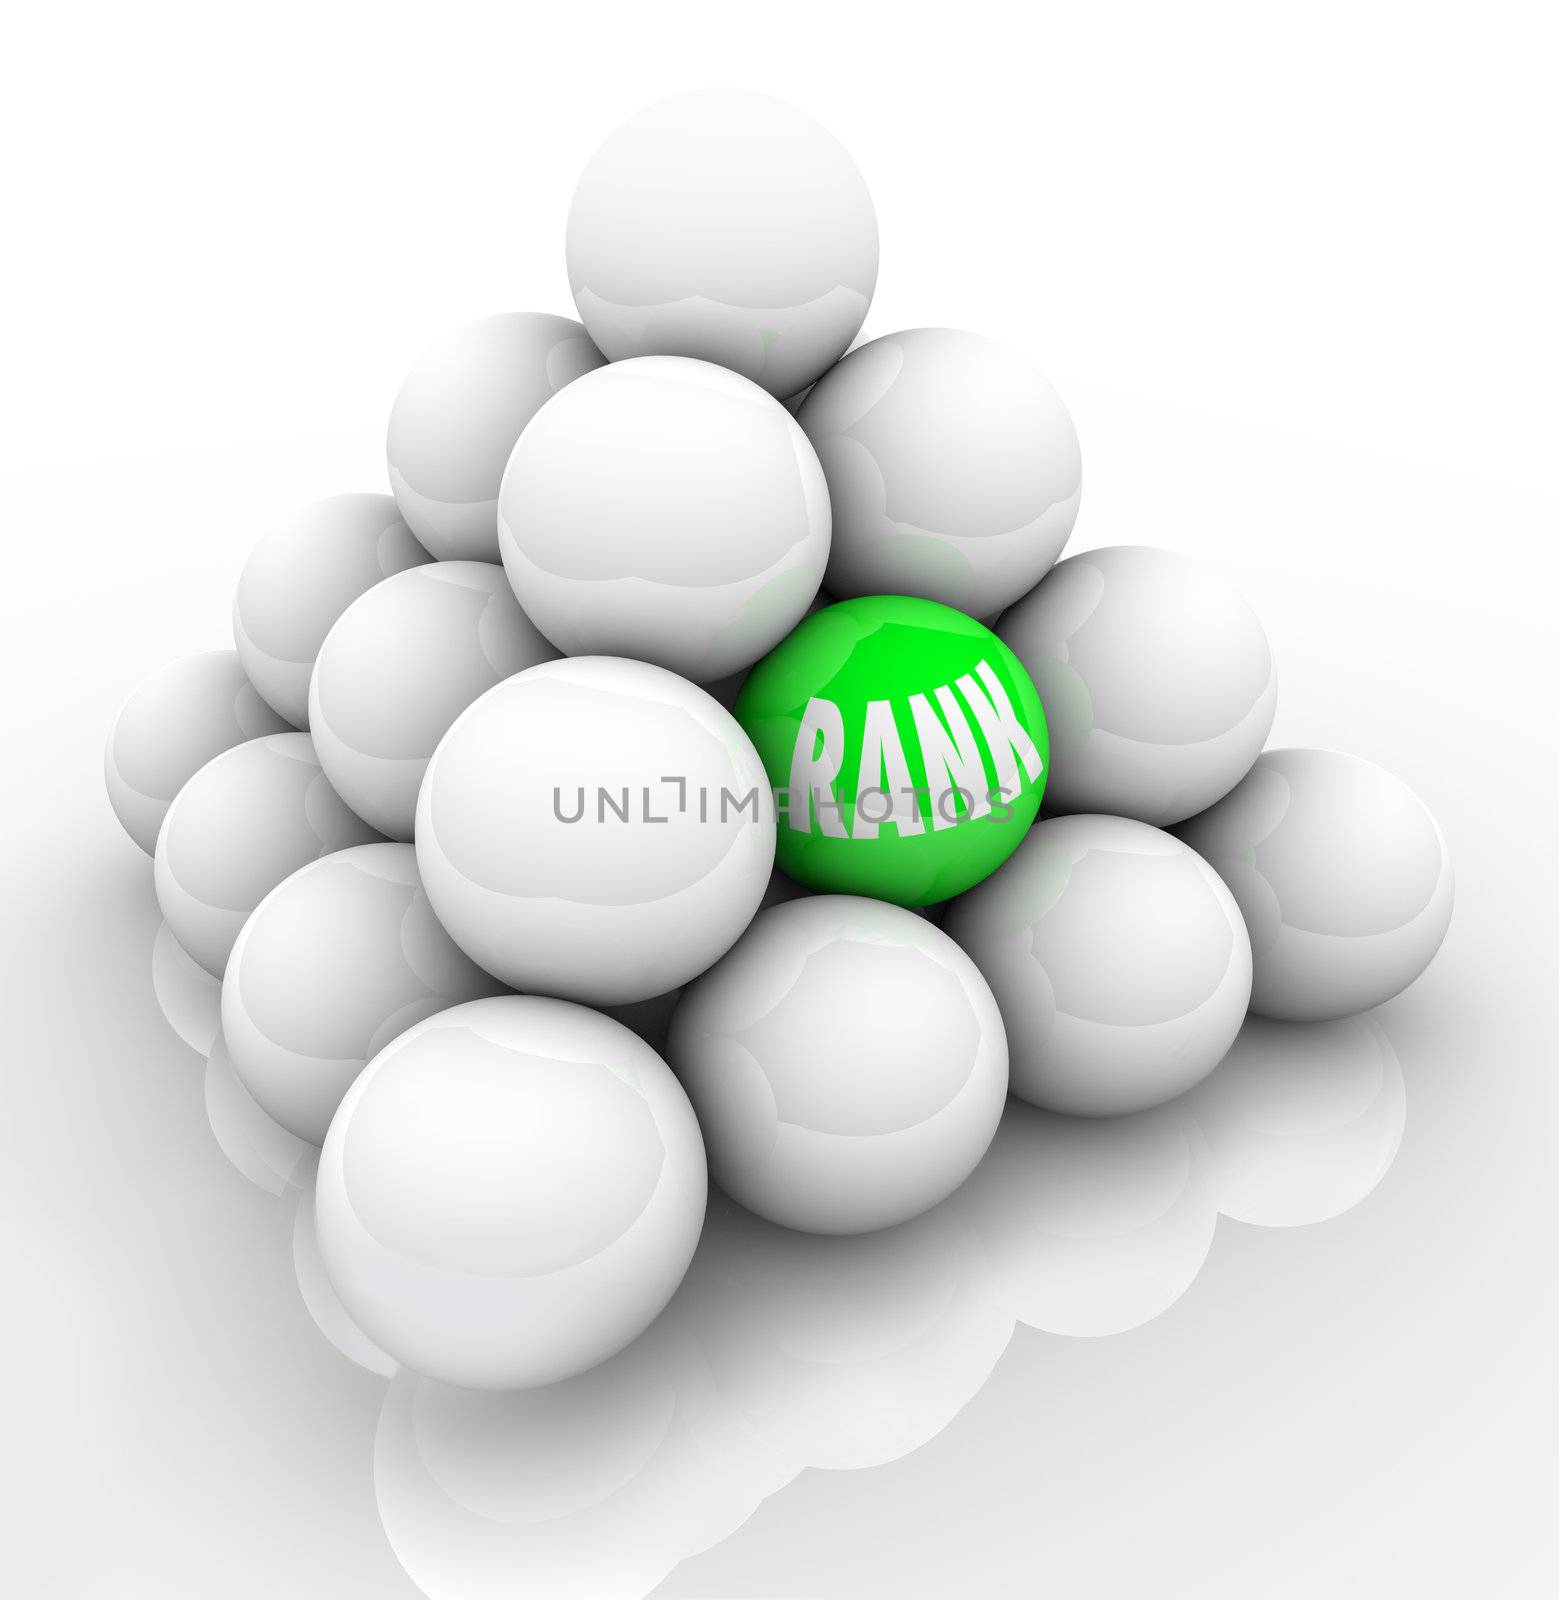 A single green ball marked Rank in the middle of many others to represent your ranking in relation and comparison to your competition or others in your market